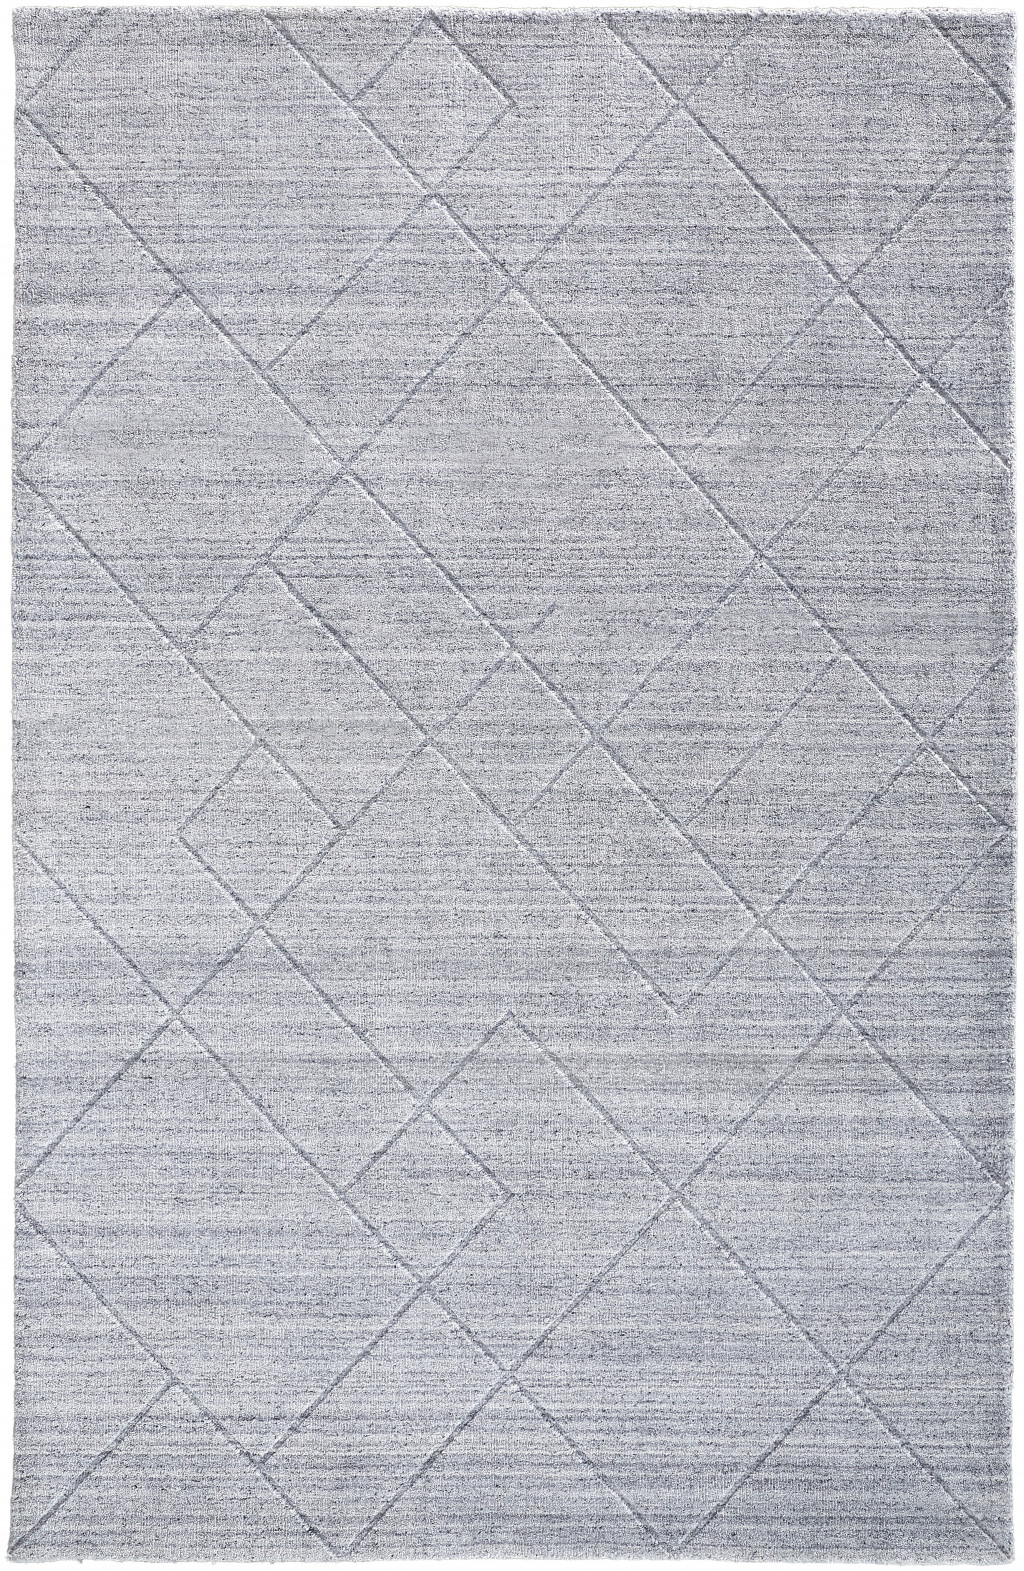 12' X 15' Gray And Silver Striped Hand Woven Area Rug-514796-1